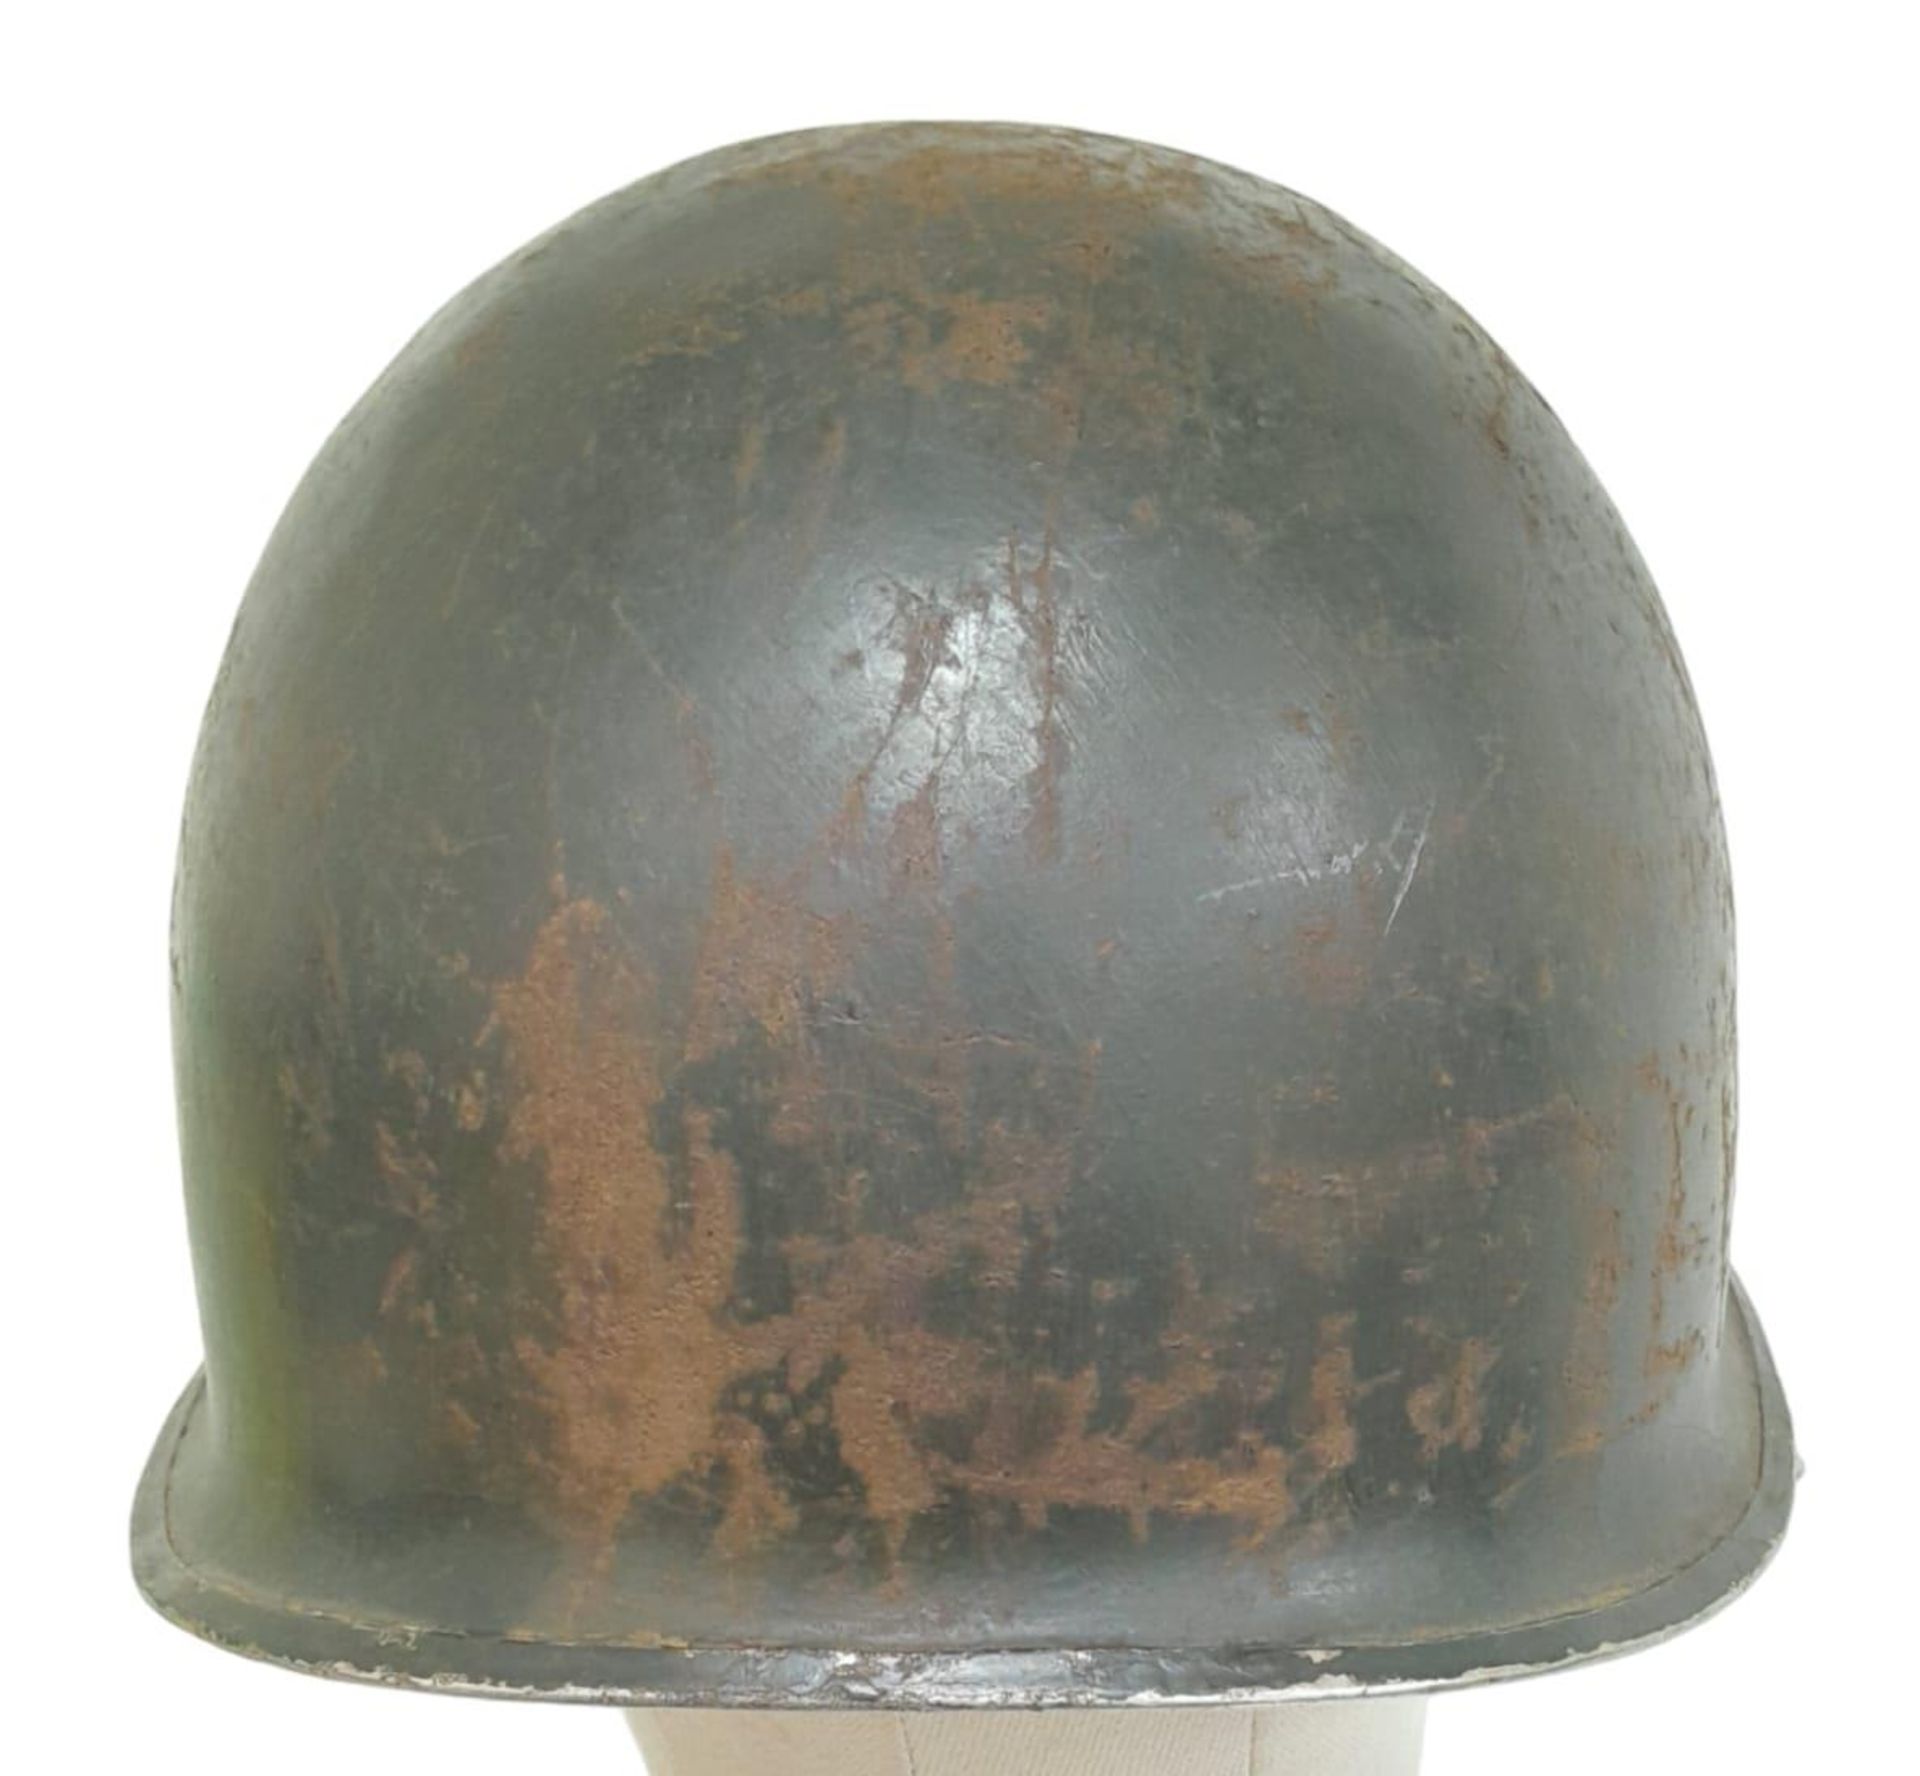 WW2 US Front Seam Swivel Bale M1 Helmet. Badged to a Tank Destroyer Unit. Found in a junk shop - Image 6 of 9